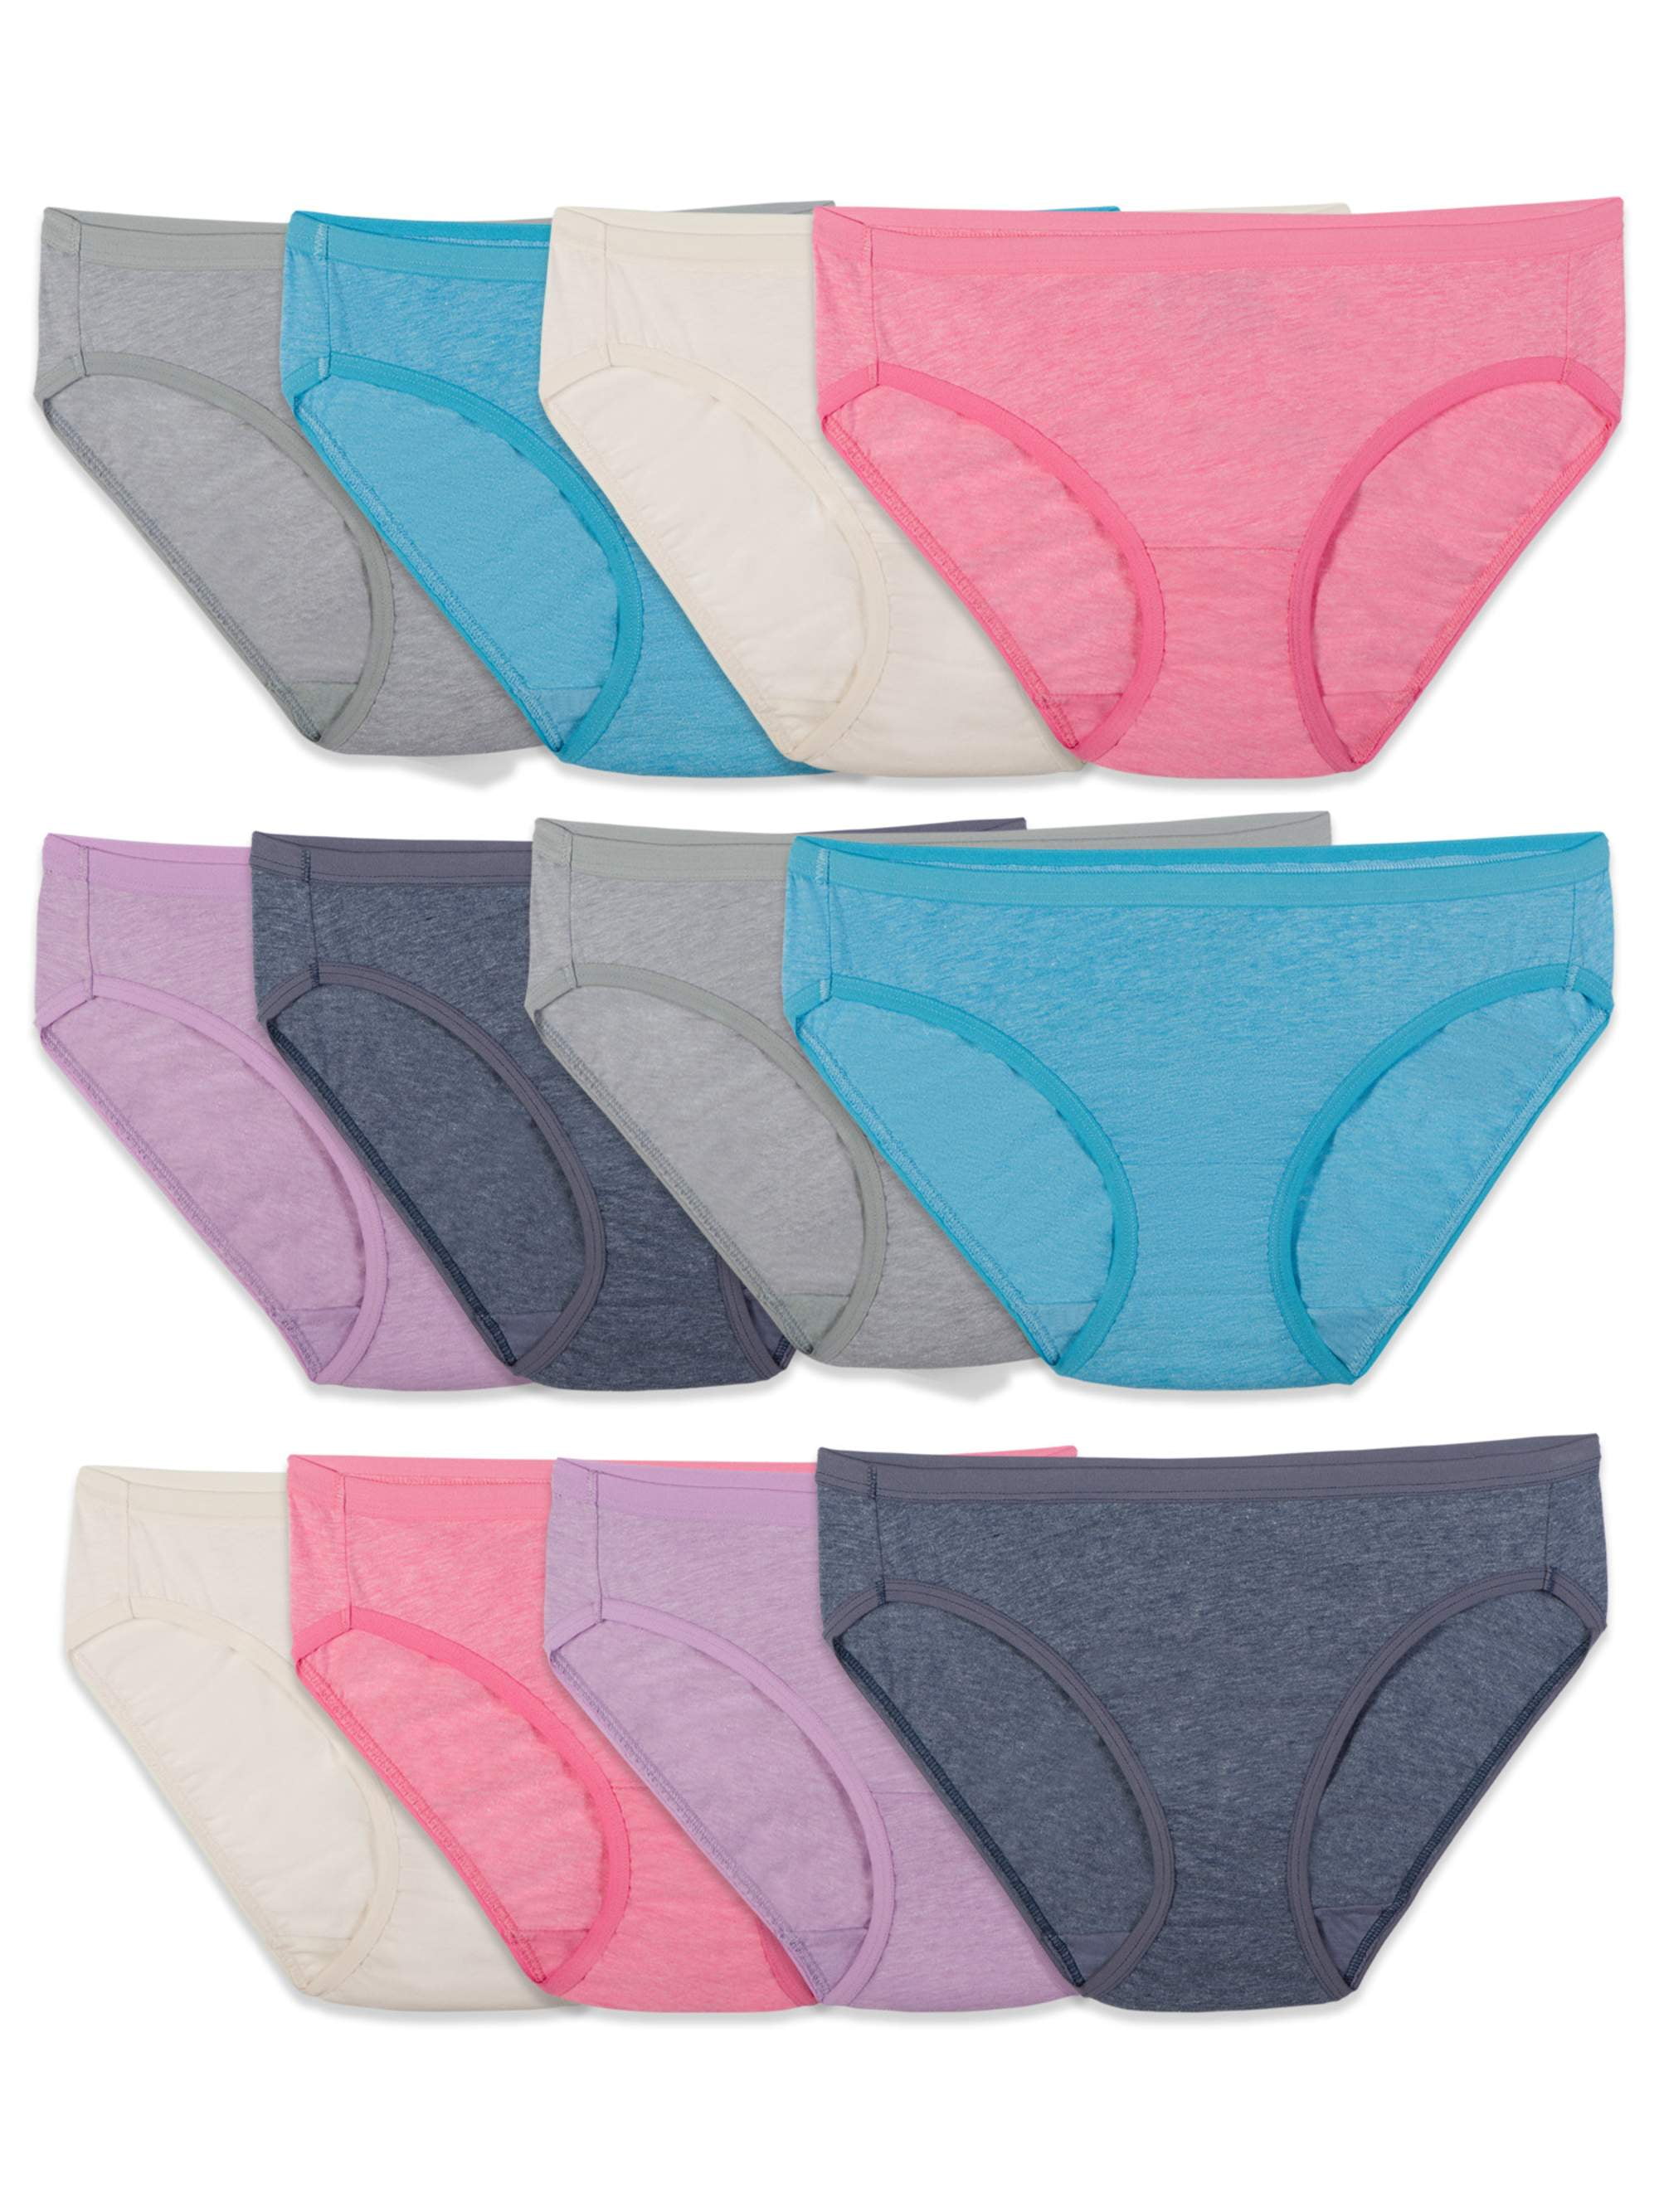 Details about   Fruit of the Loom Women's 6 Pack Beyondsoft Panties